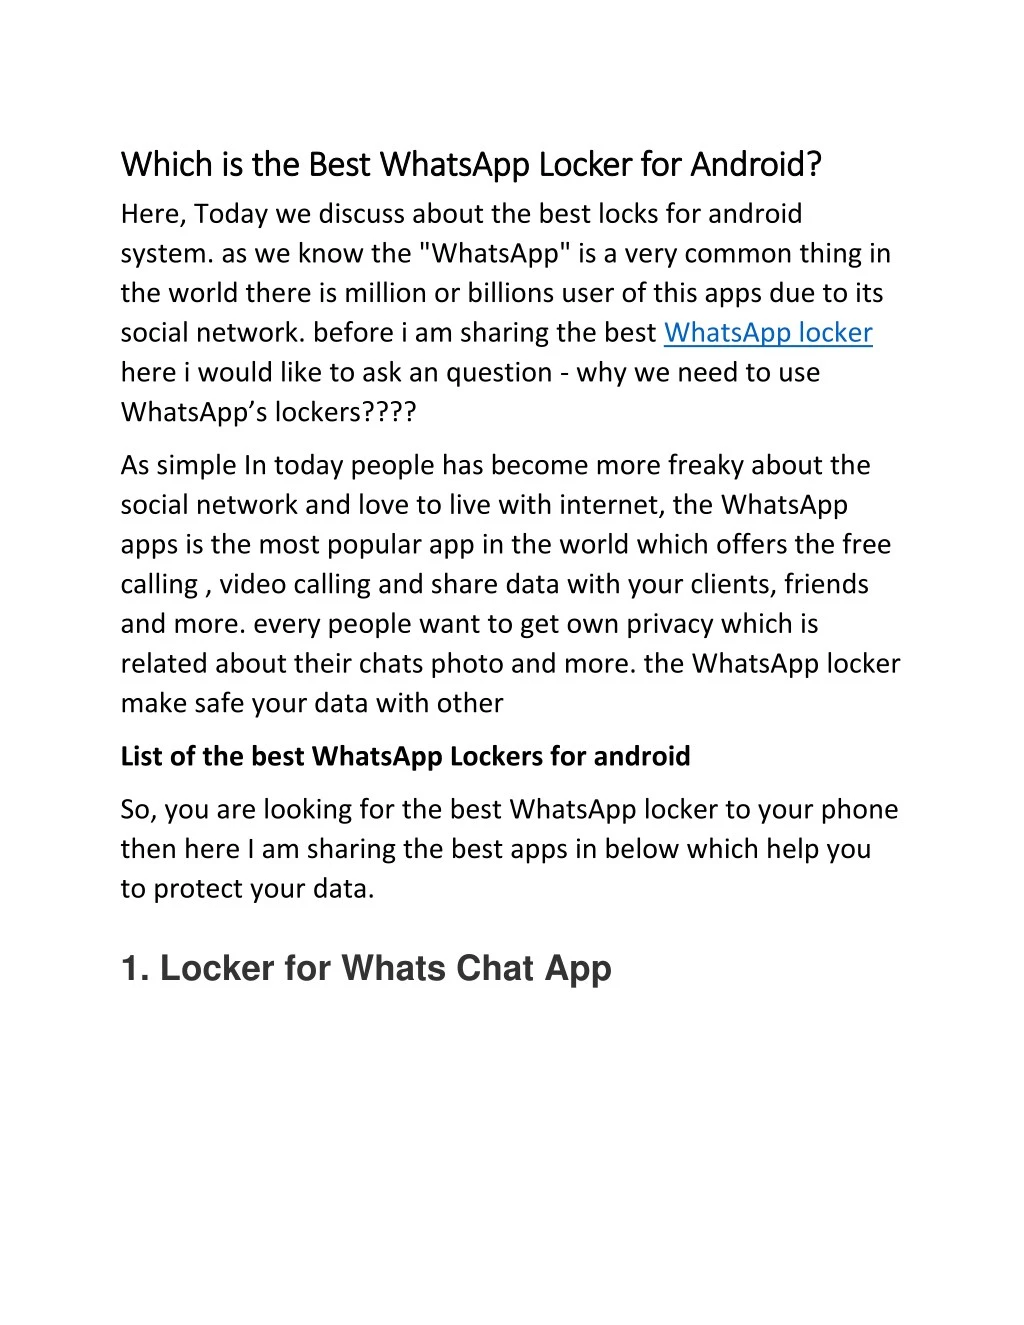 which is the best whatsapp locker for android